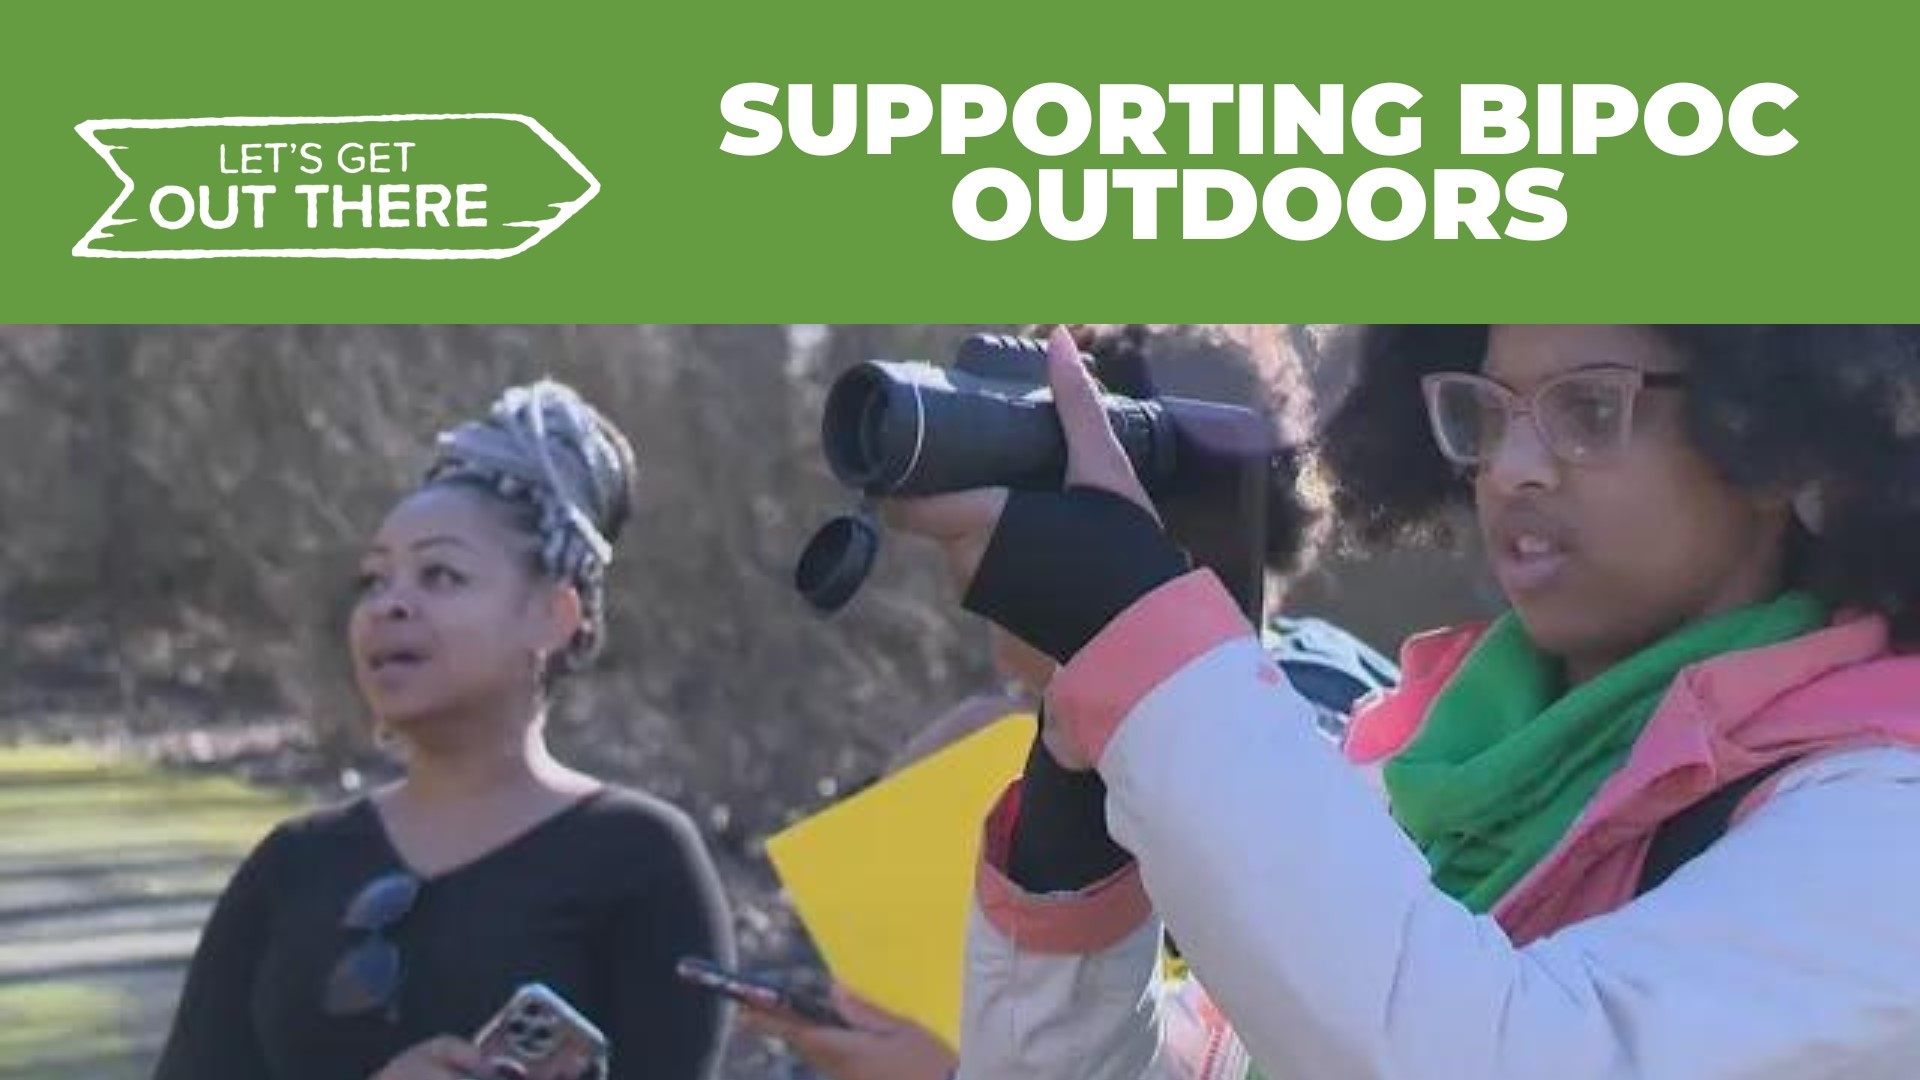 People of Color Outdoors was founded by Pam Slaughter after being harassed on the trail. POCO is her way to support others and prevent that from happening to them.